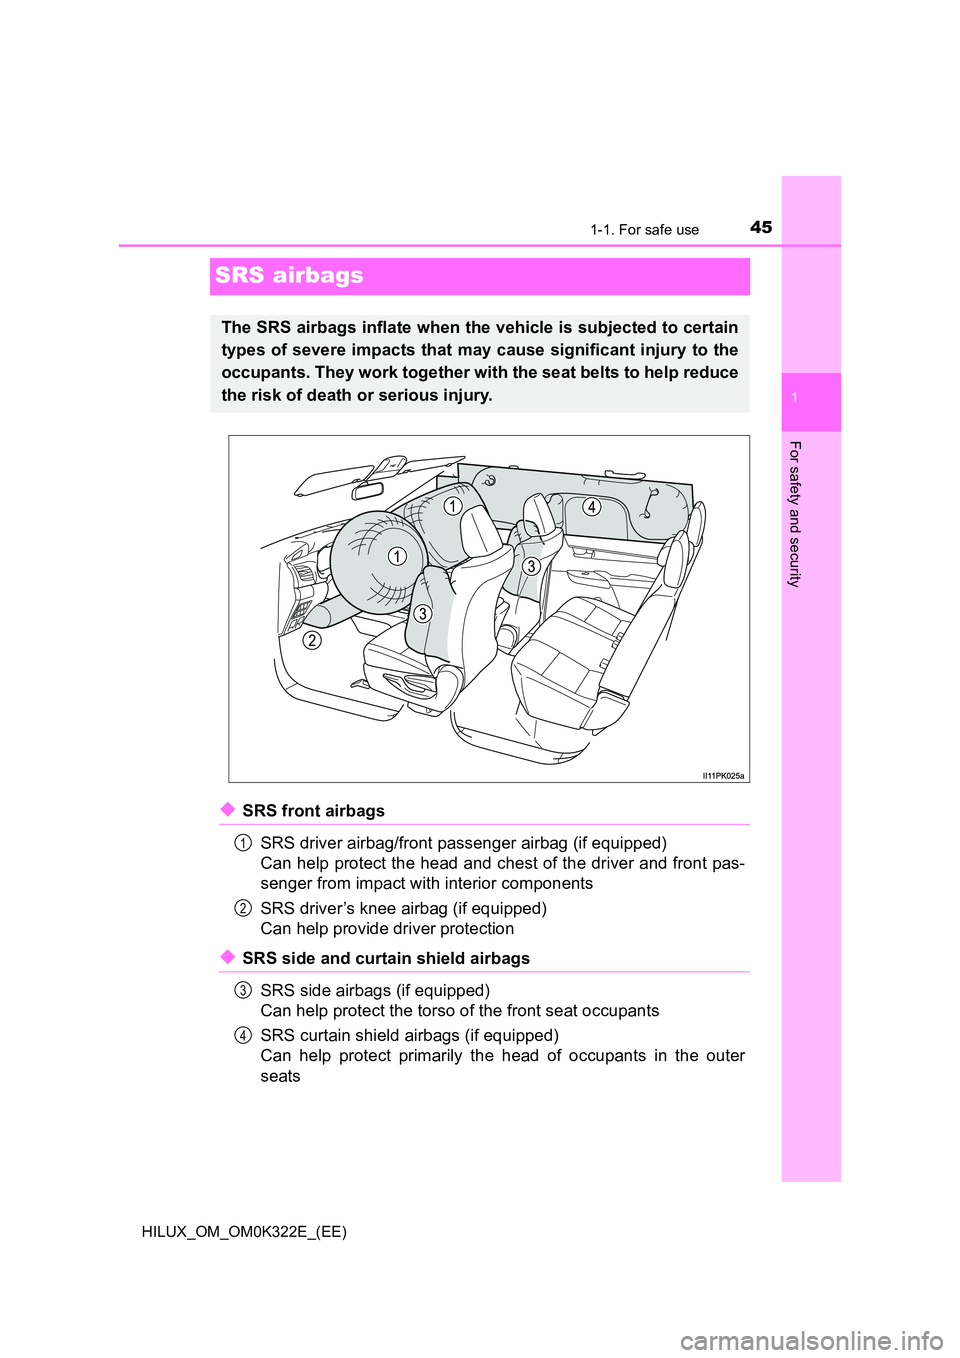 TOYOTA HILUX 2017  Owners Manual (in English) 451-1. For safe use
1
For safety and security
HILUX_OM_OM0K322E_(EE)
SRS airbags
◆SRS front airbags 
SRS driver airbag/front passenger airbag (if equipped) 
Can help protect the head and chest of th